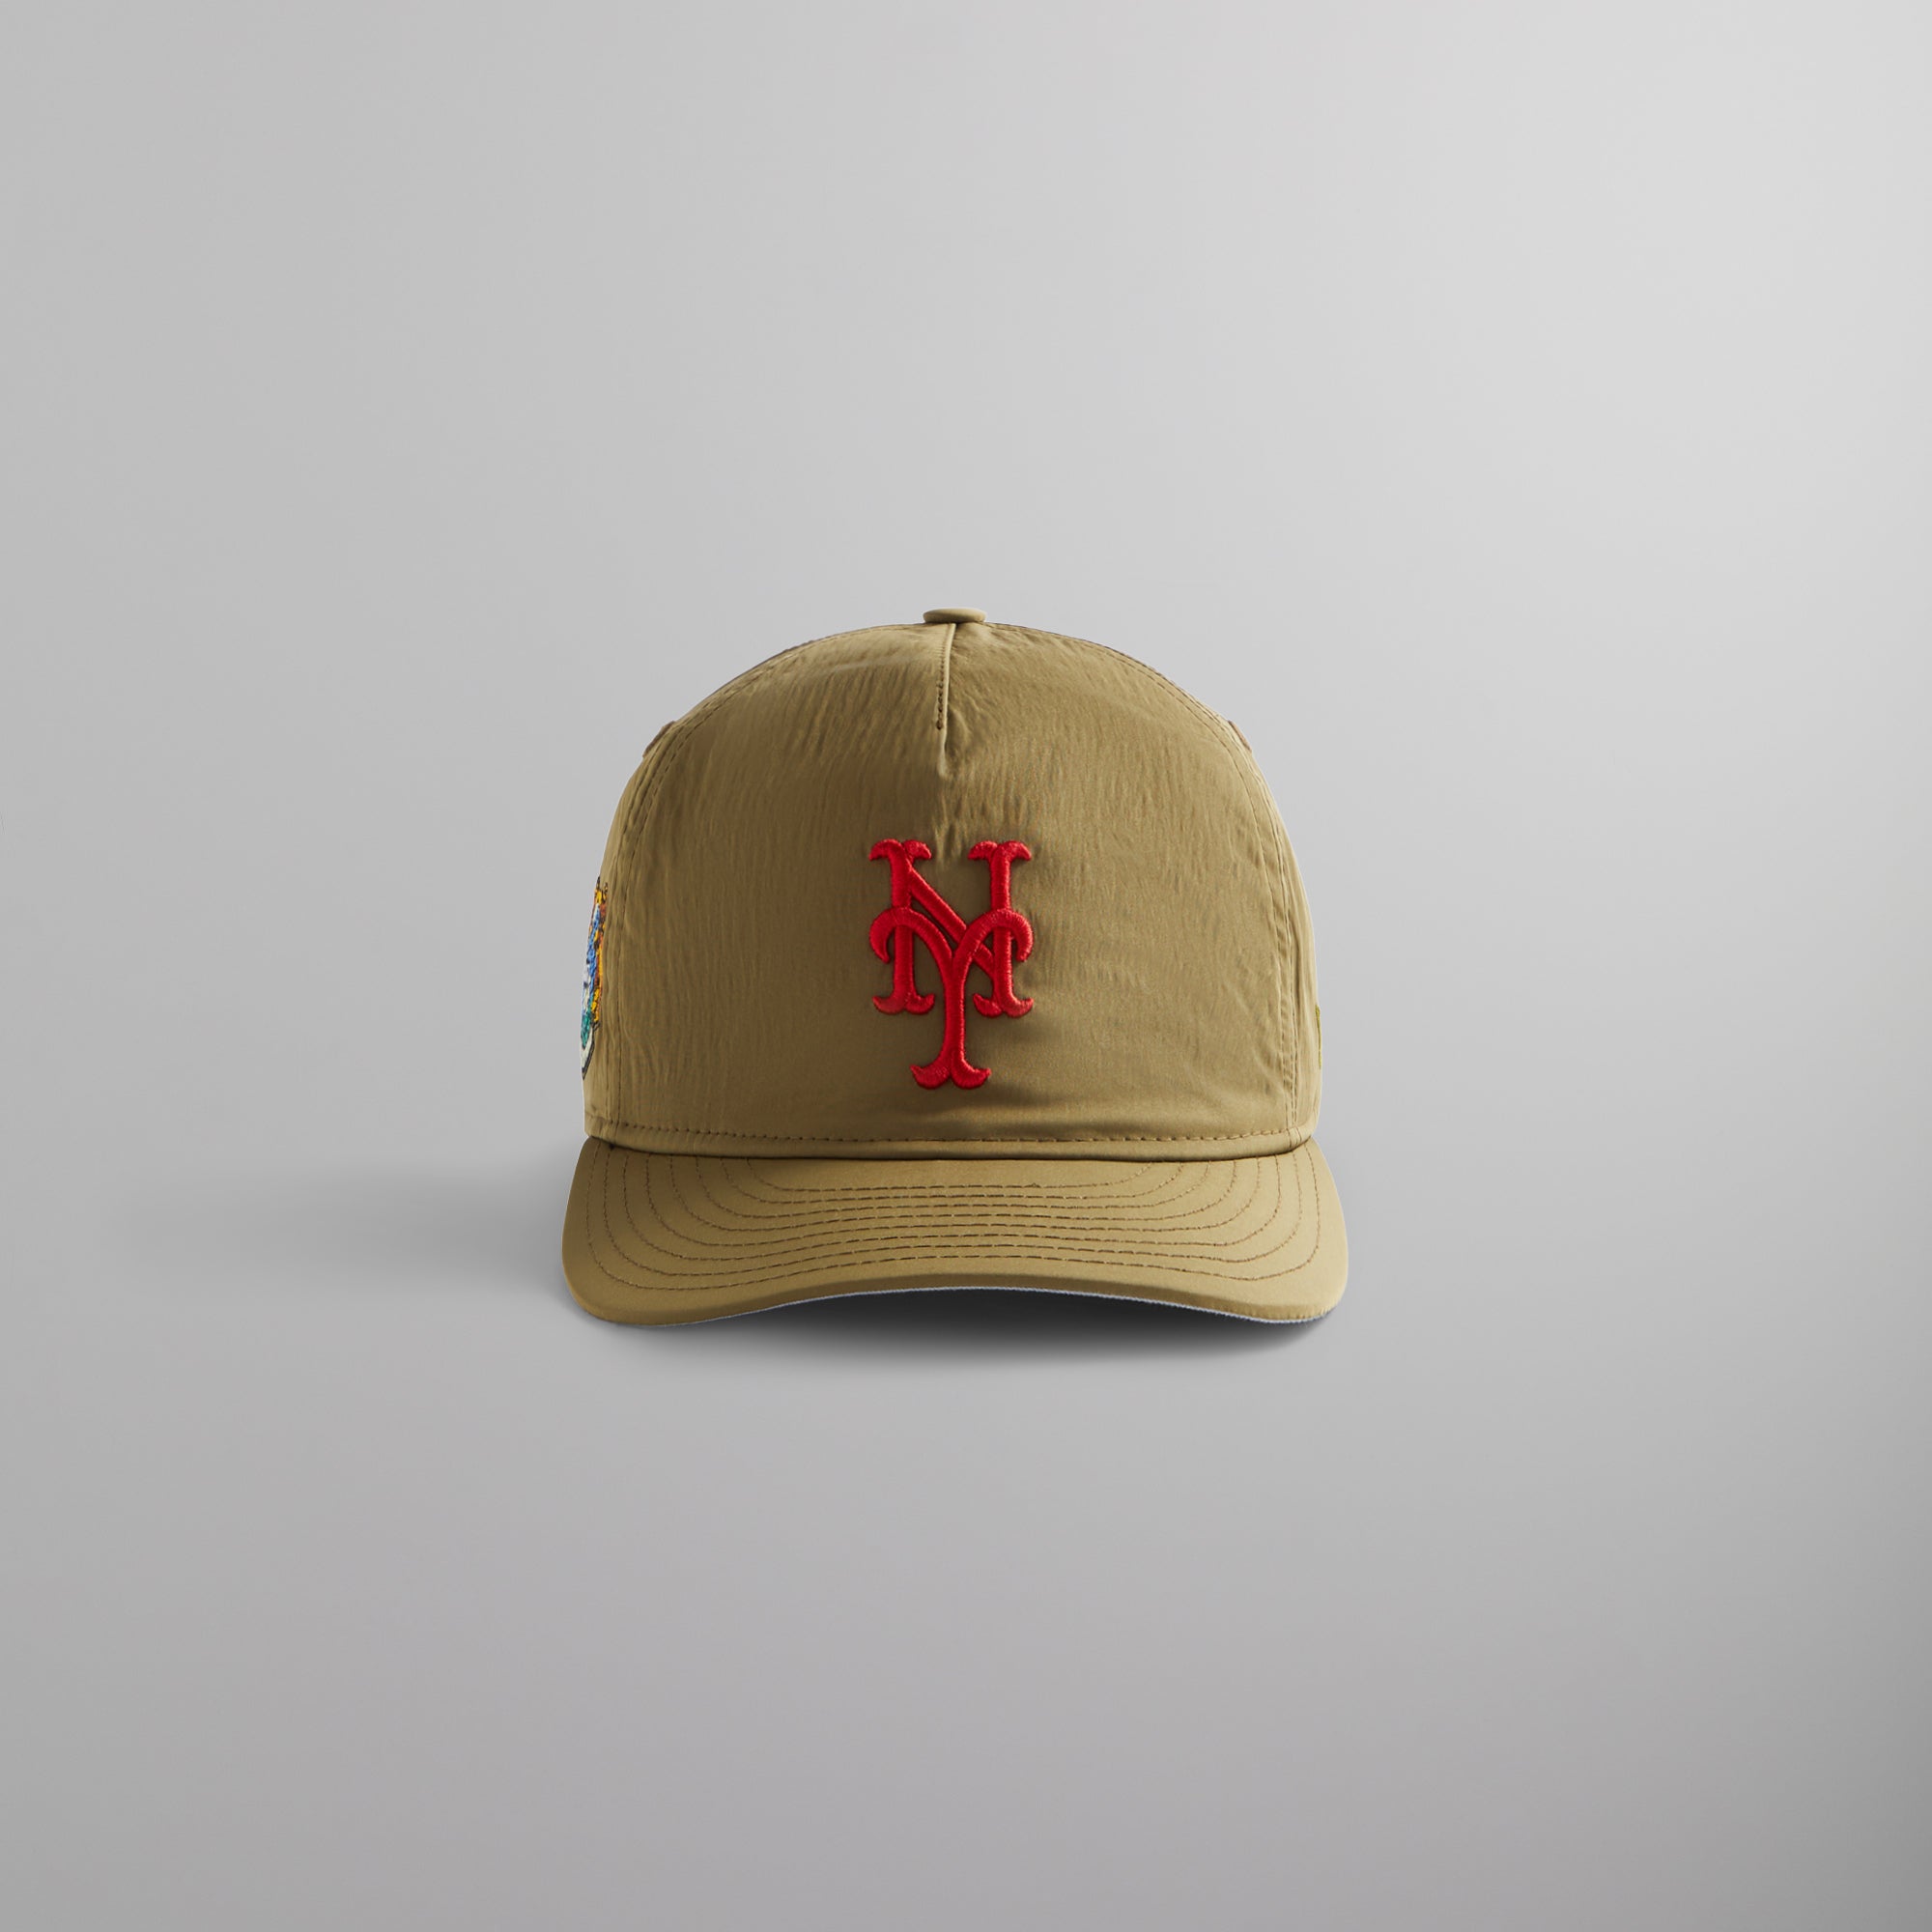 Kith & New Era for Mets Nylon 9FIFTY A-frame - Court